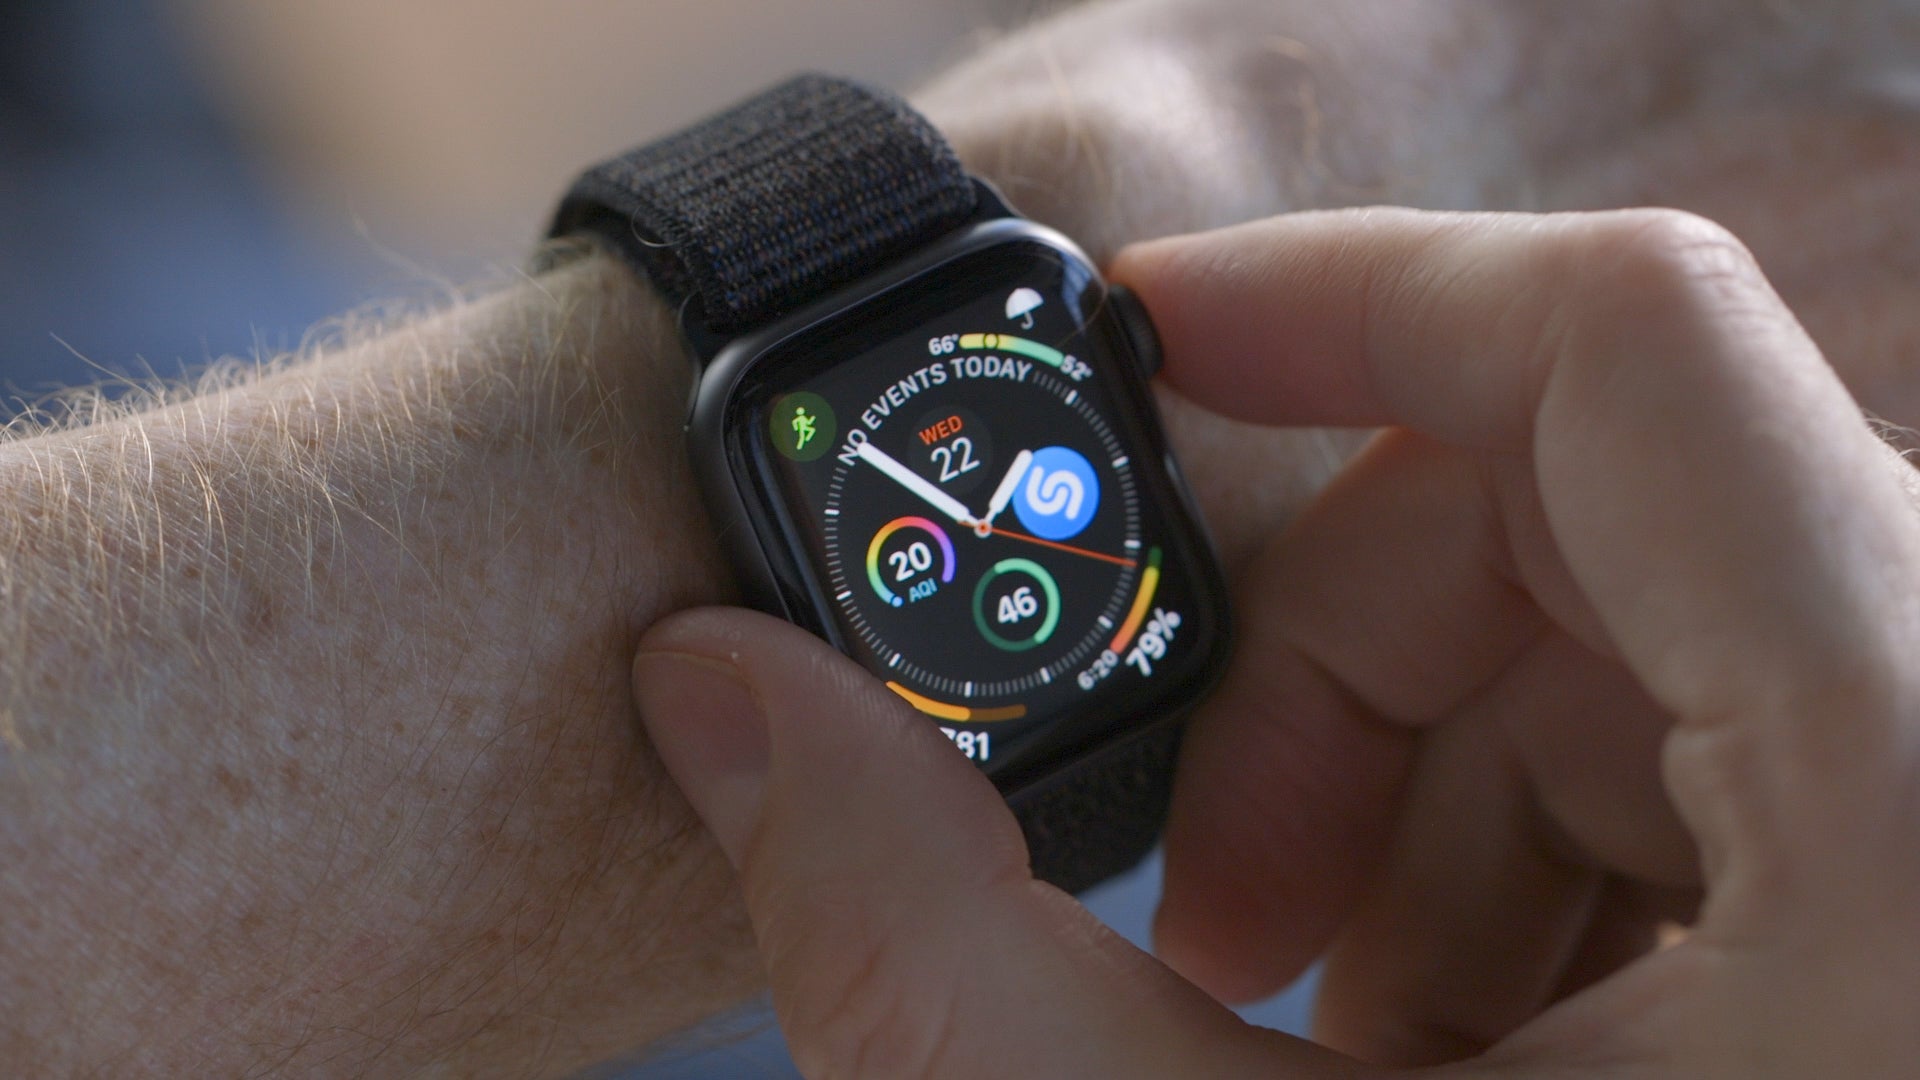 It’s time to liberate the Apple Watch from the iPhone